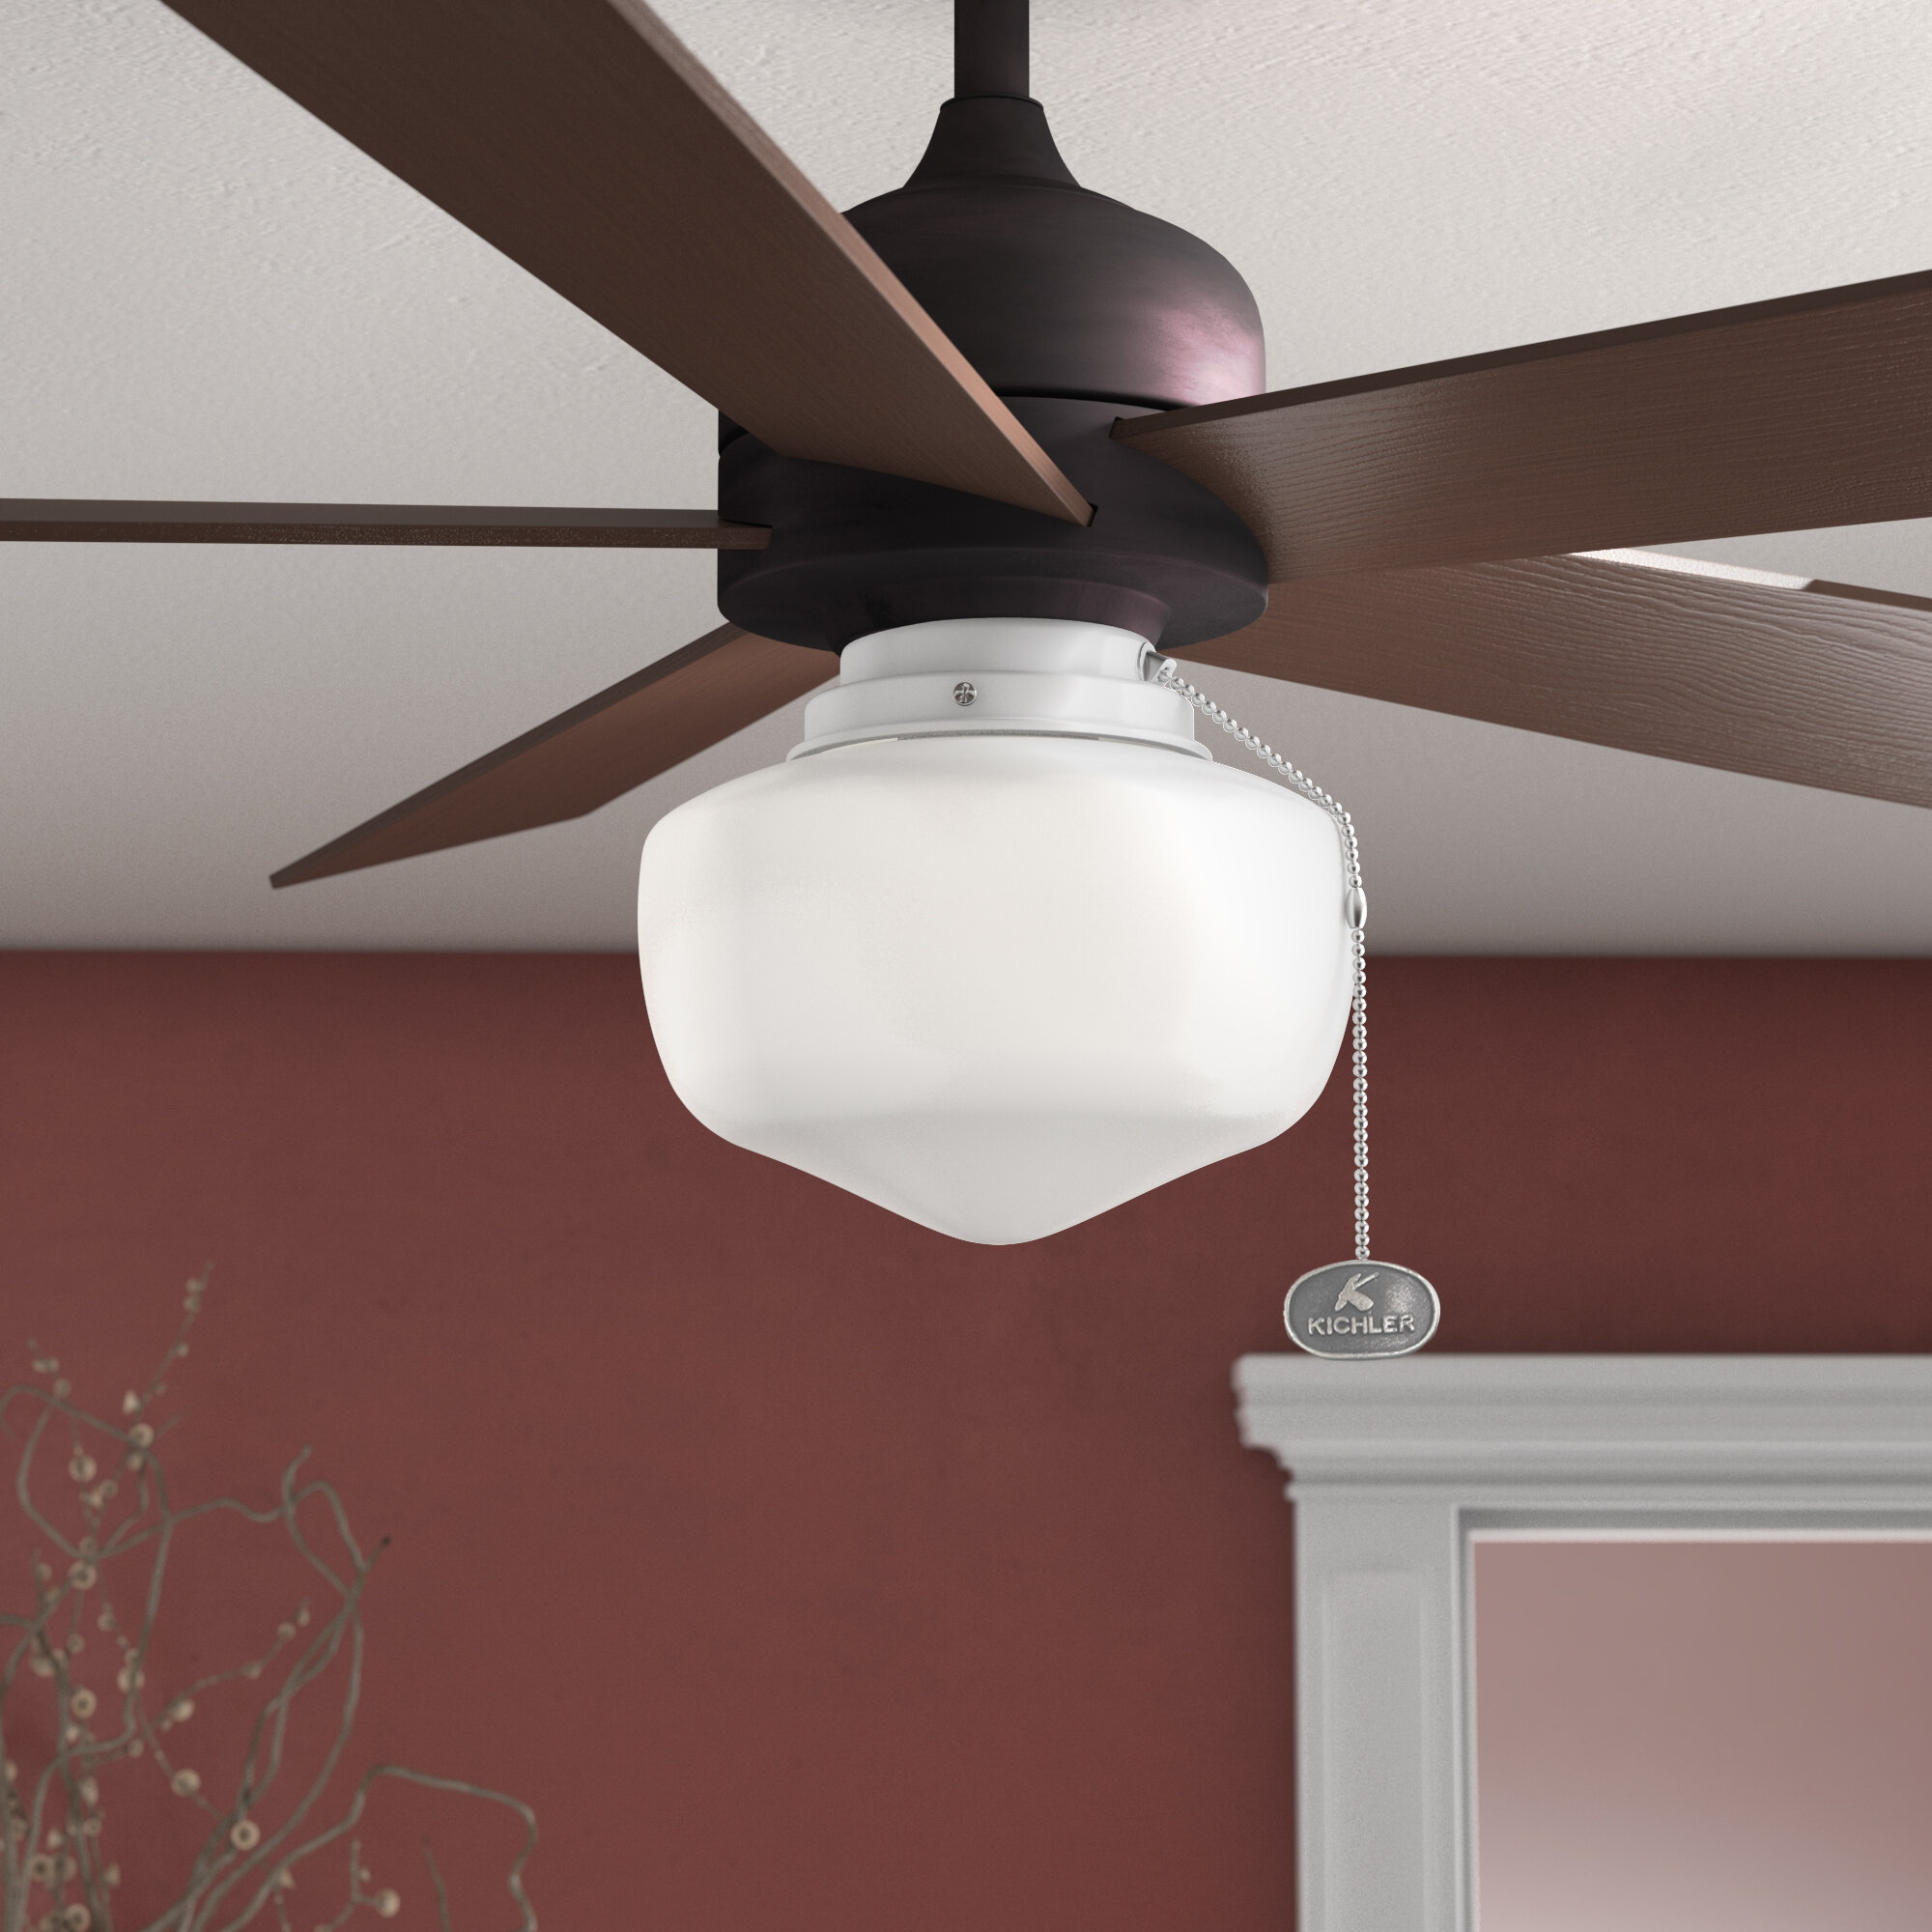 Westinghouse Lighting 7784600 Led Schoolhouse Indoor Outdoor Energy Star Ceiling Fan Light Kit Oil Rubbed Bronze Finish With White Opal Glass Sareg Com